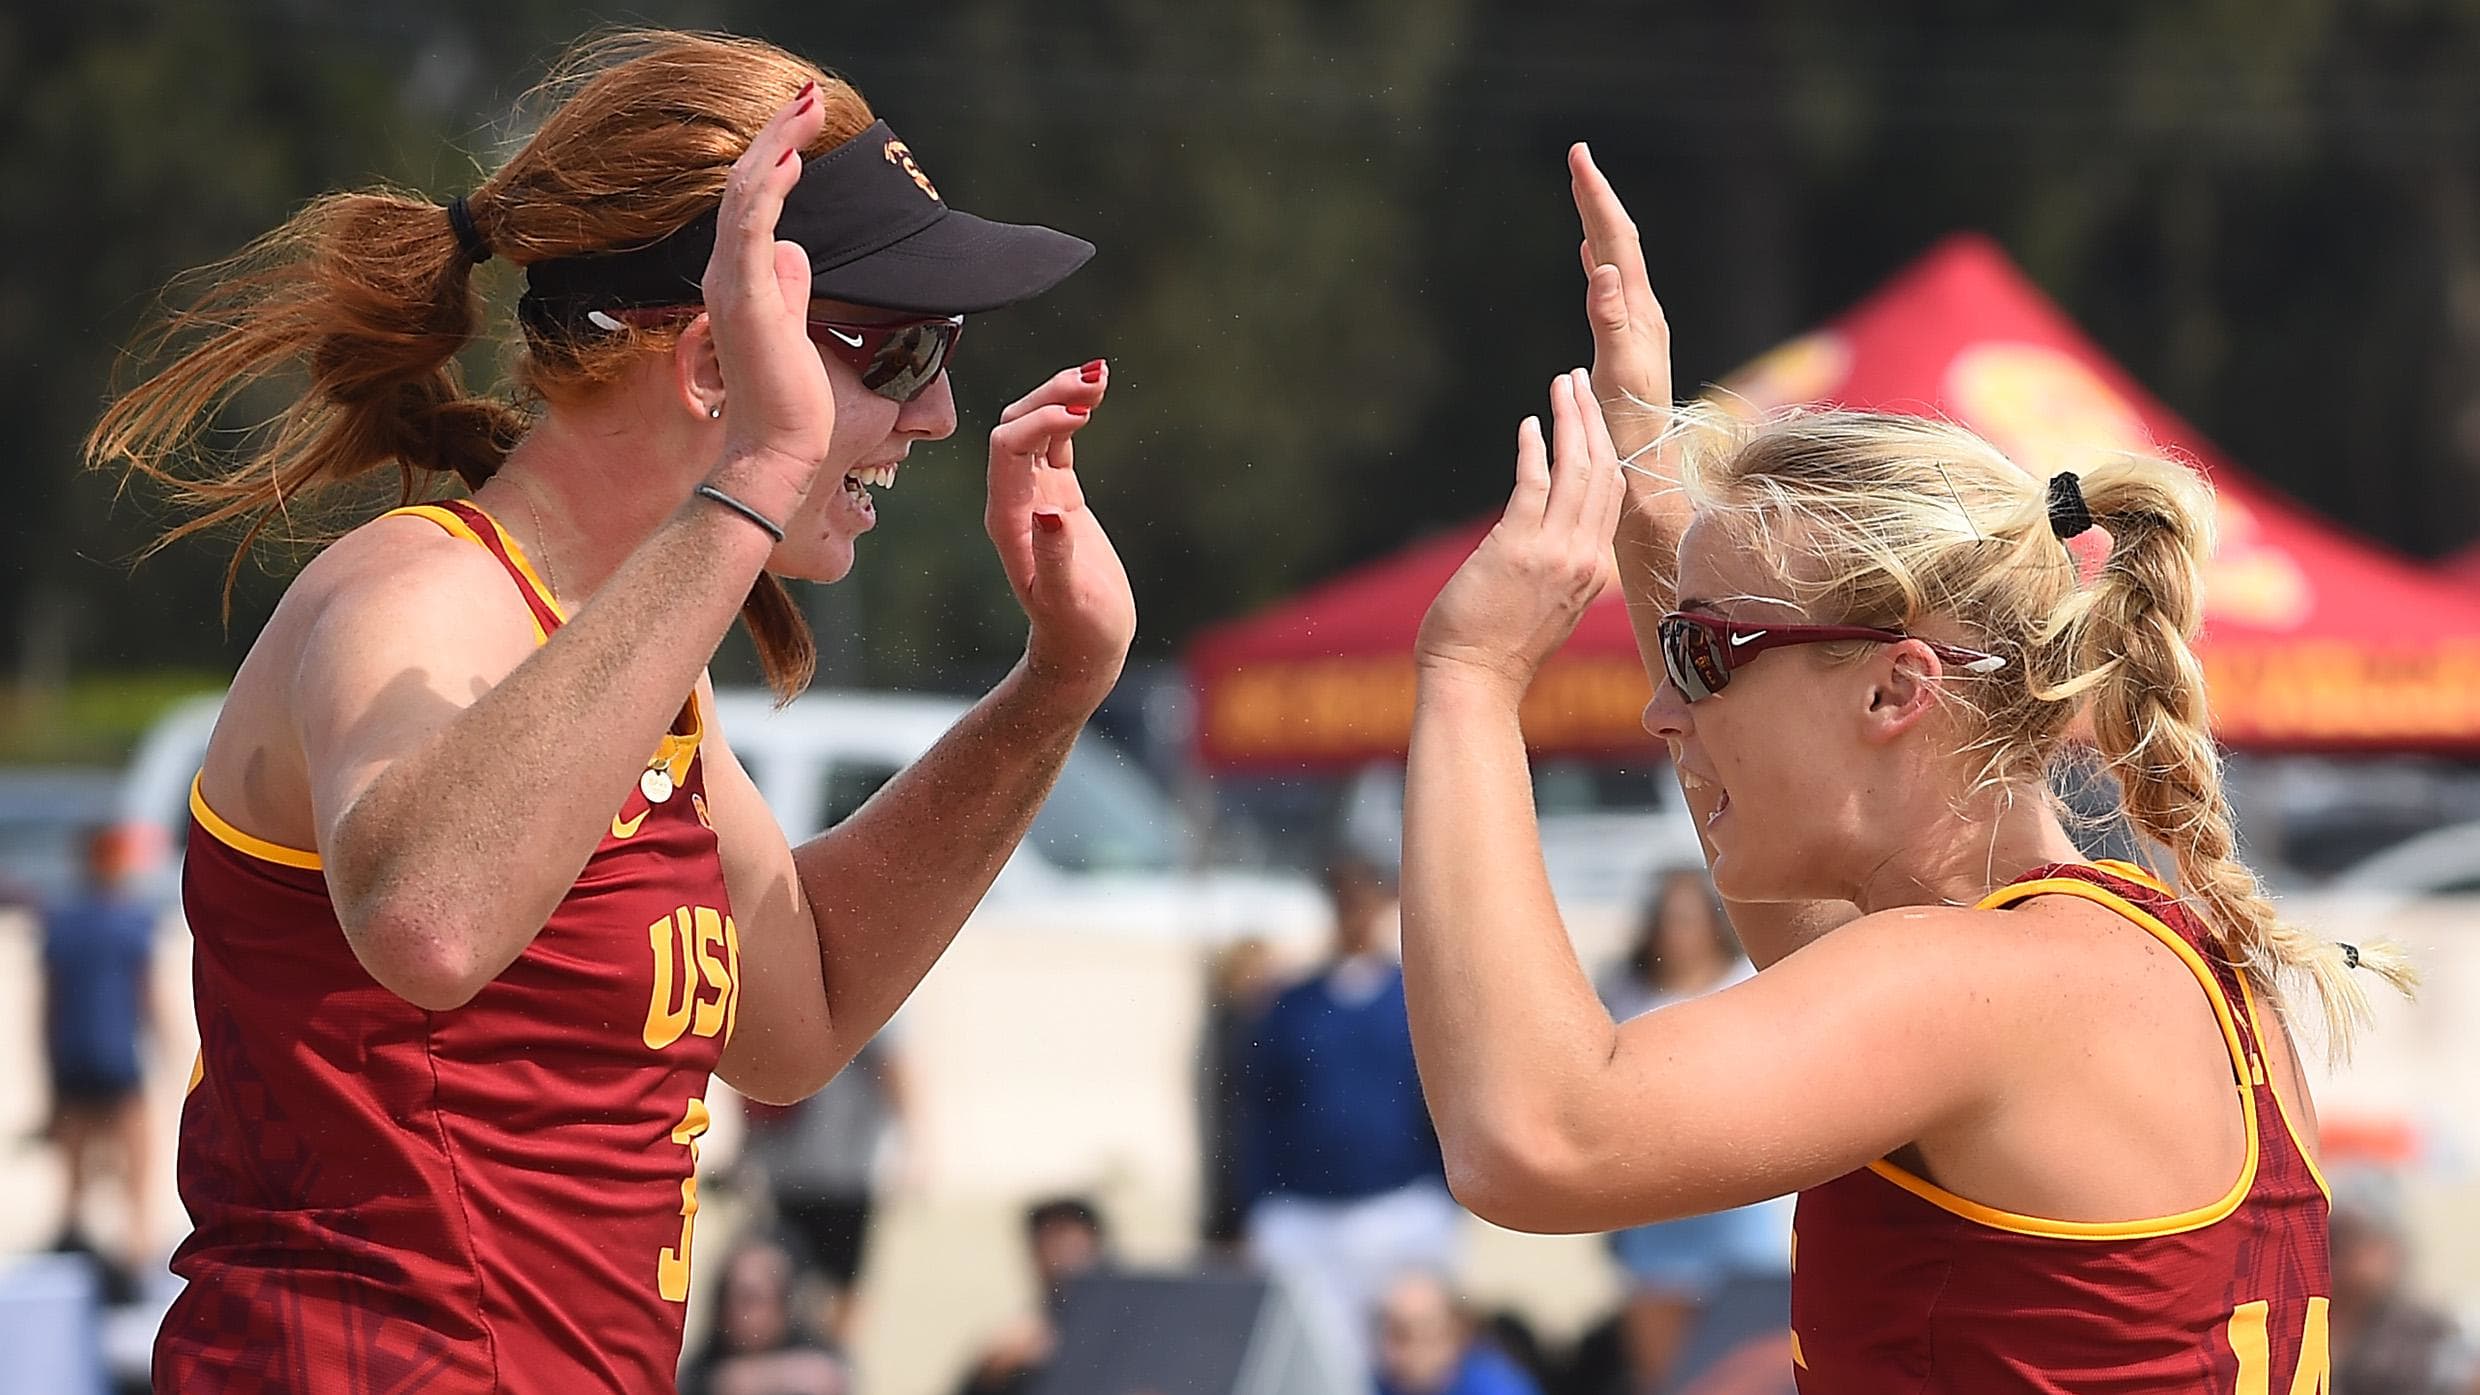 USC Women's Beach Volleyball Wins 4th Consecutive Championship, Besting Loathed Rival